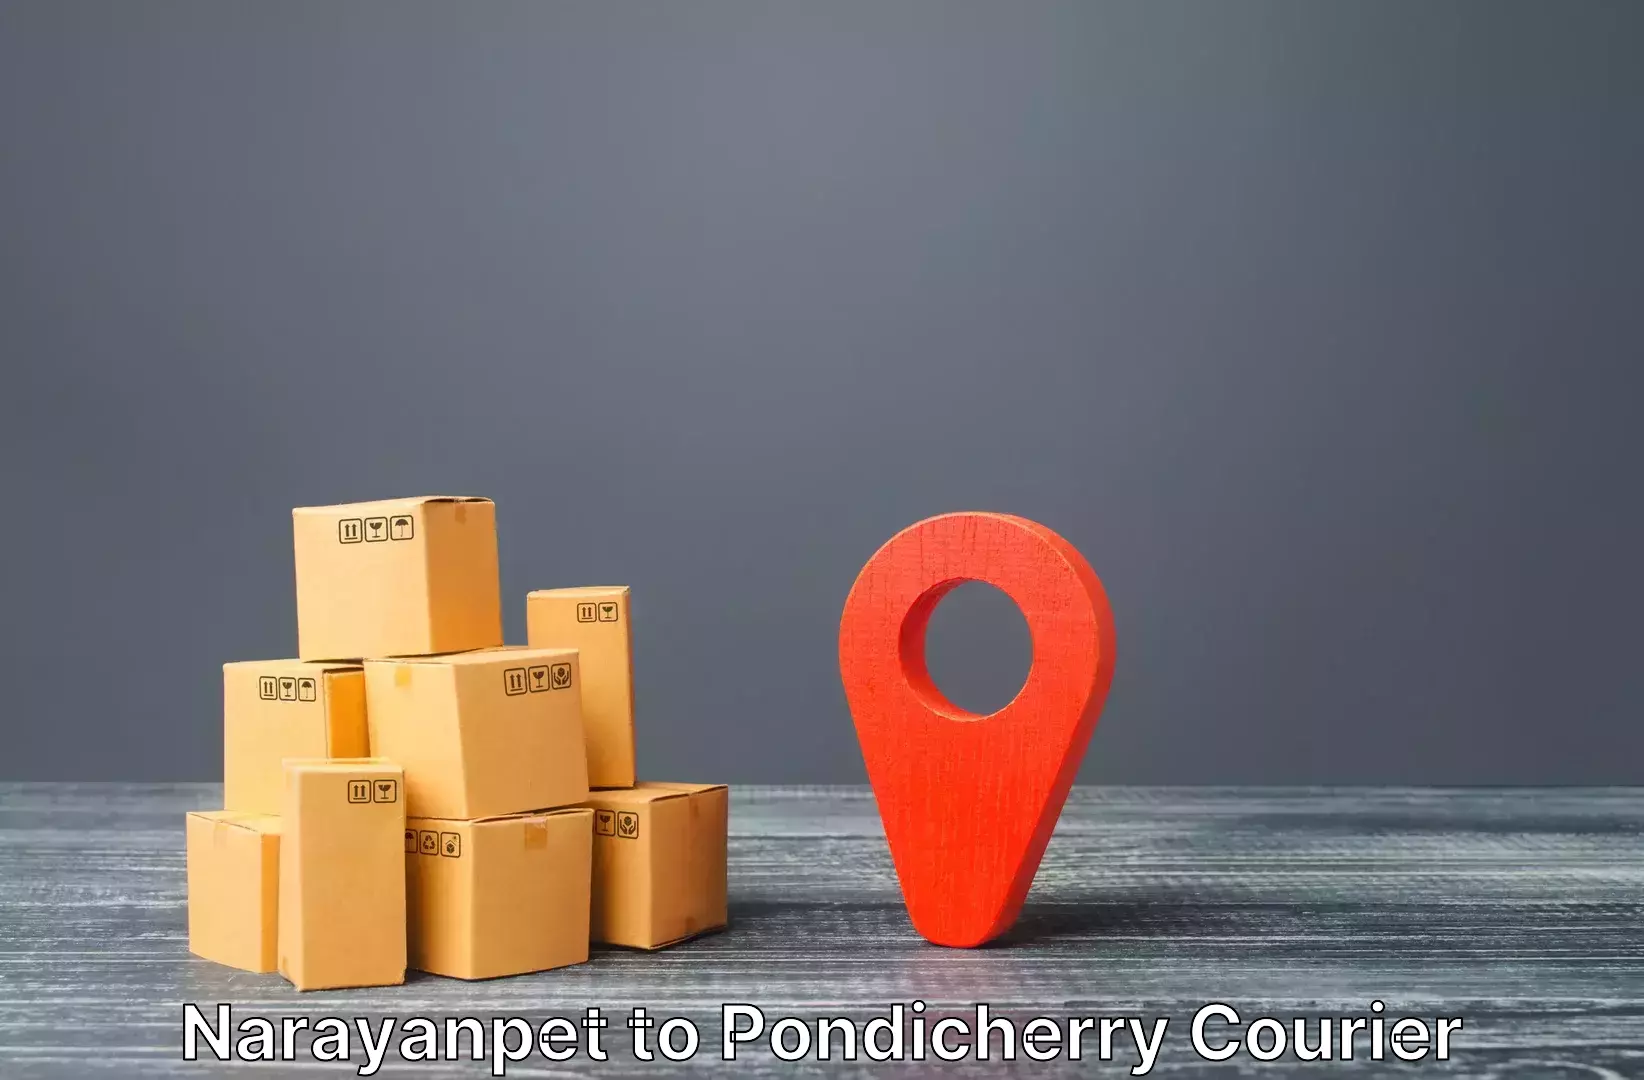 Luggage shipping specialists Narayanpet to Pondicherry